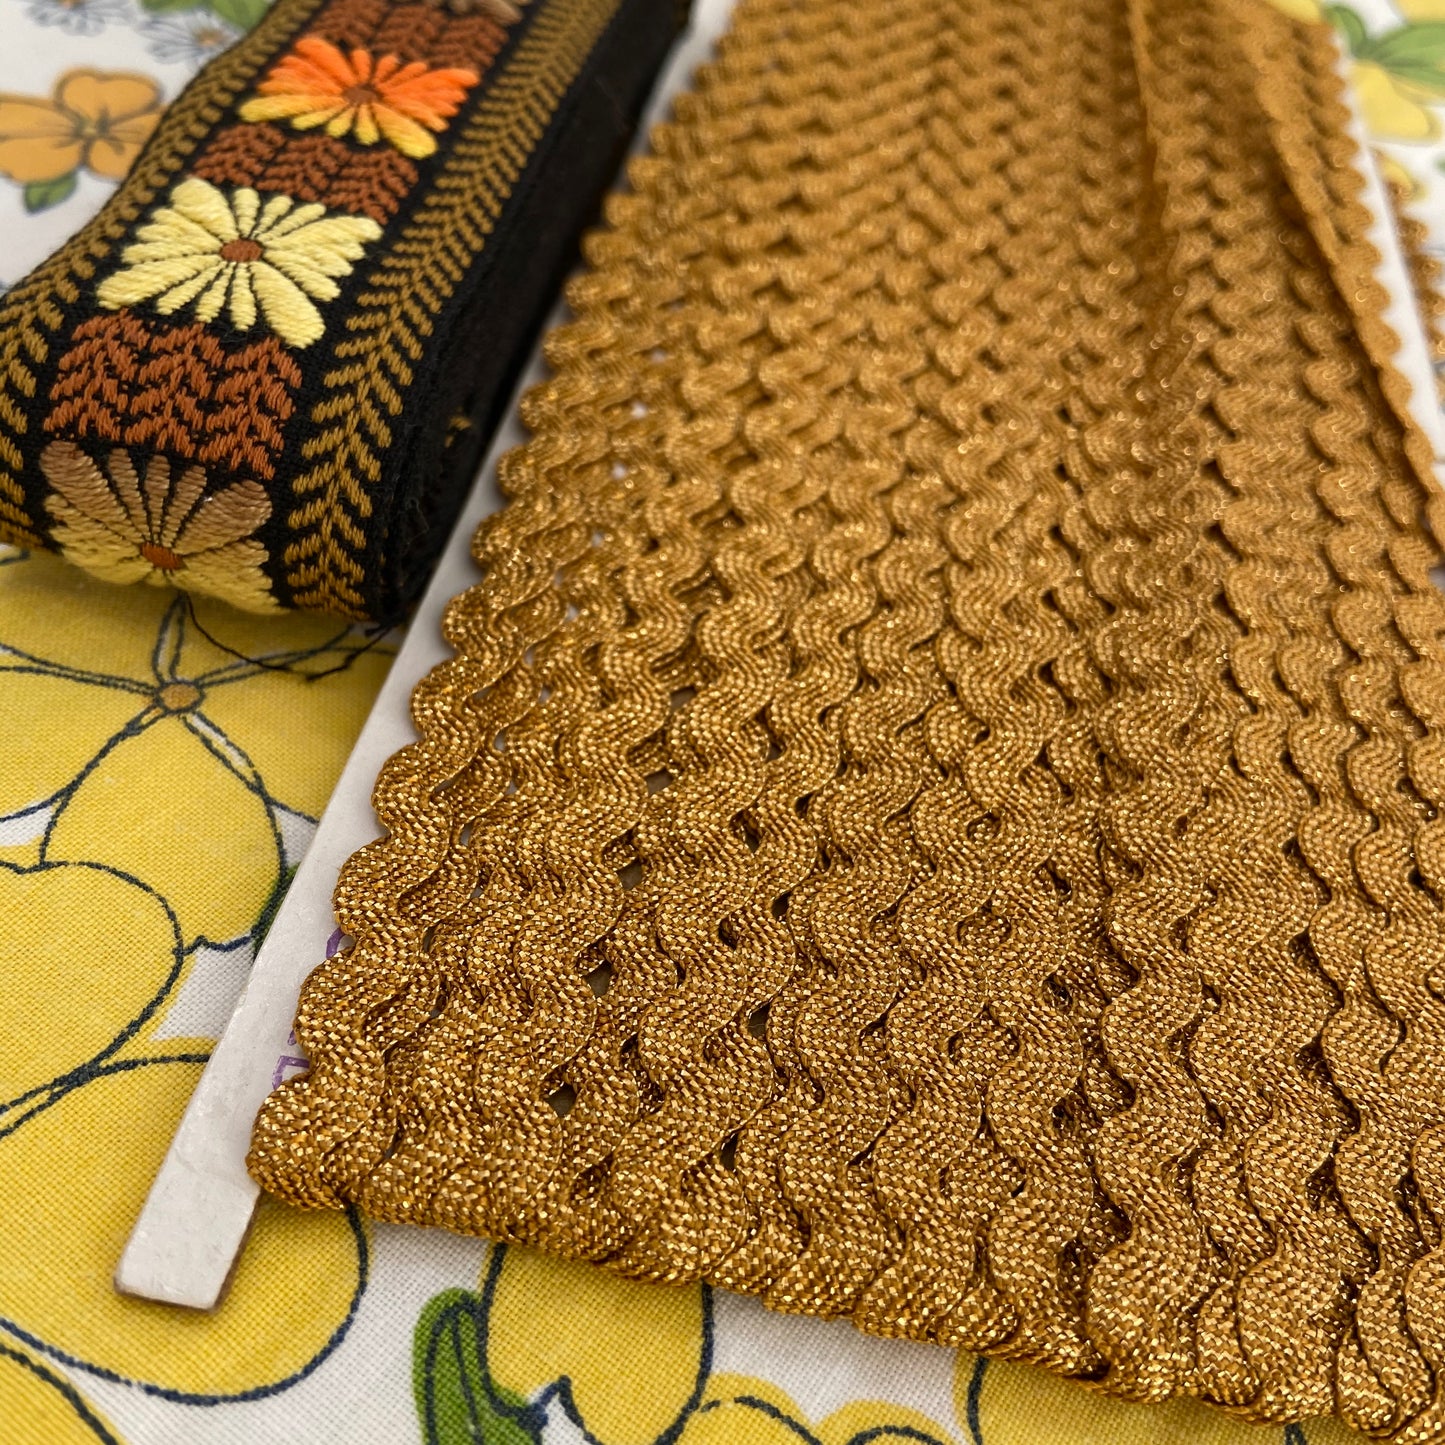 VINTAGE Embroidered Trim Ribbon 70's Craft Items RIC RAC Gold